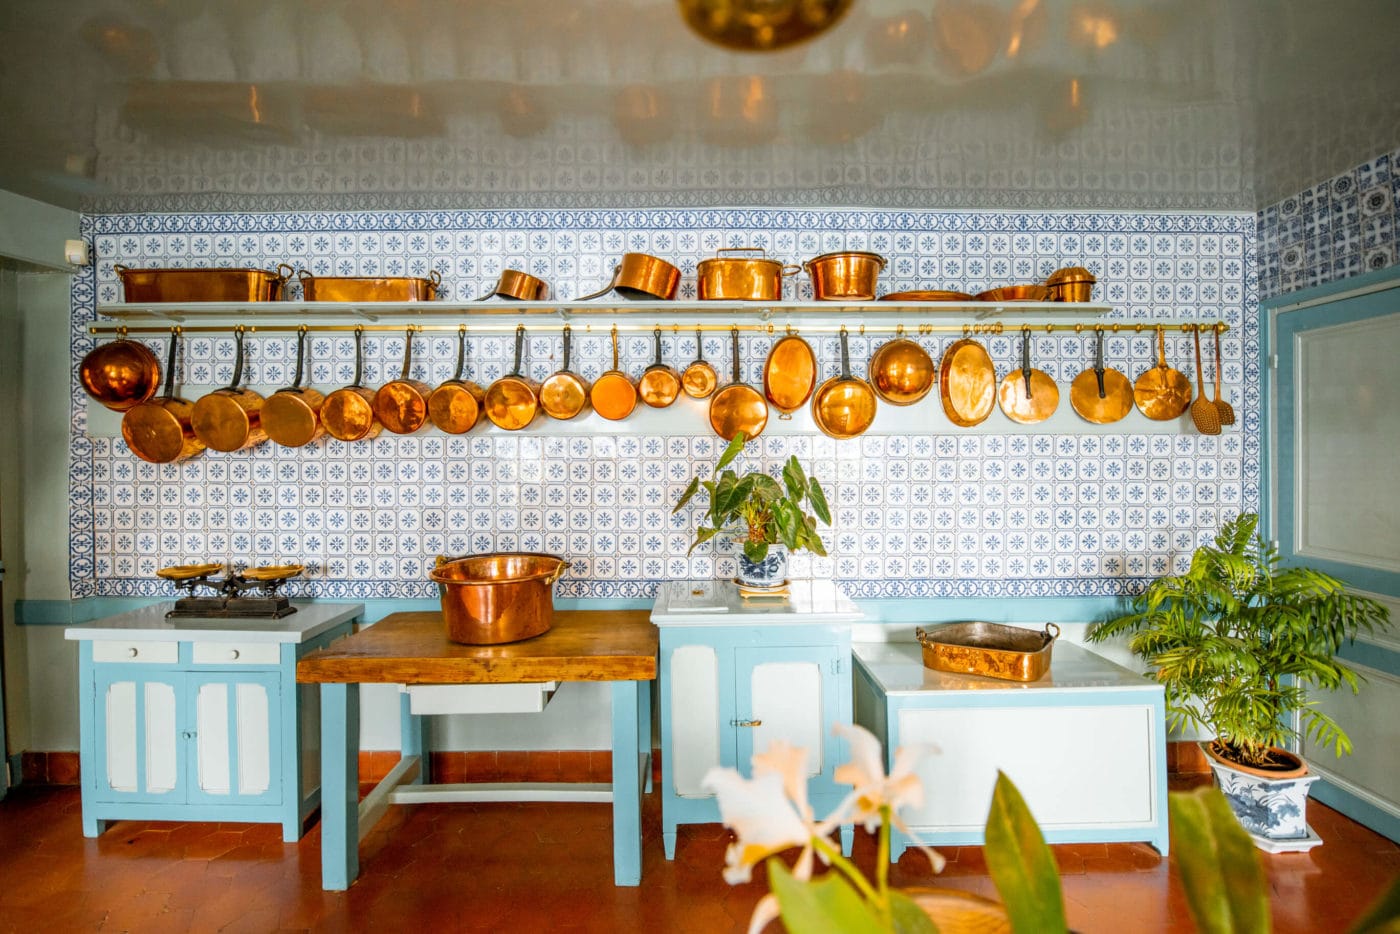 Postcard from France: Monet’s Kitchen in Giverny